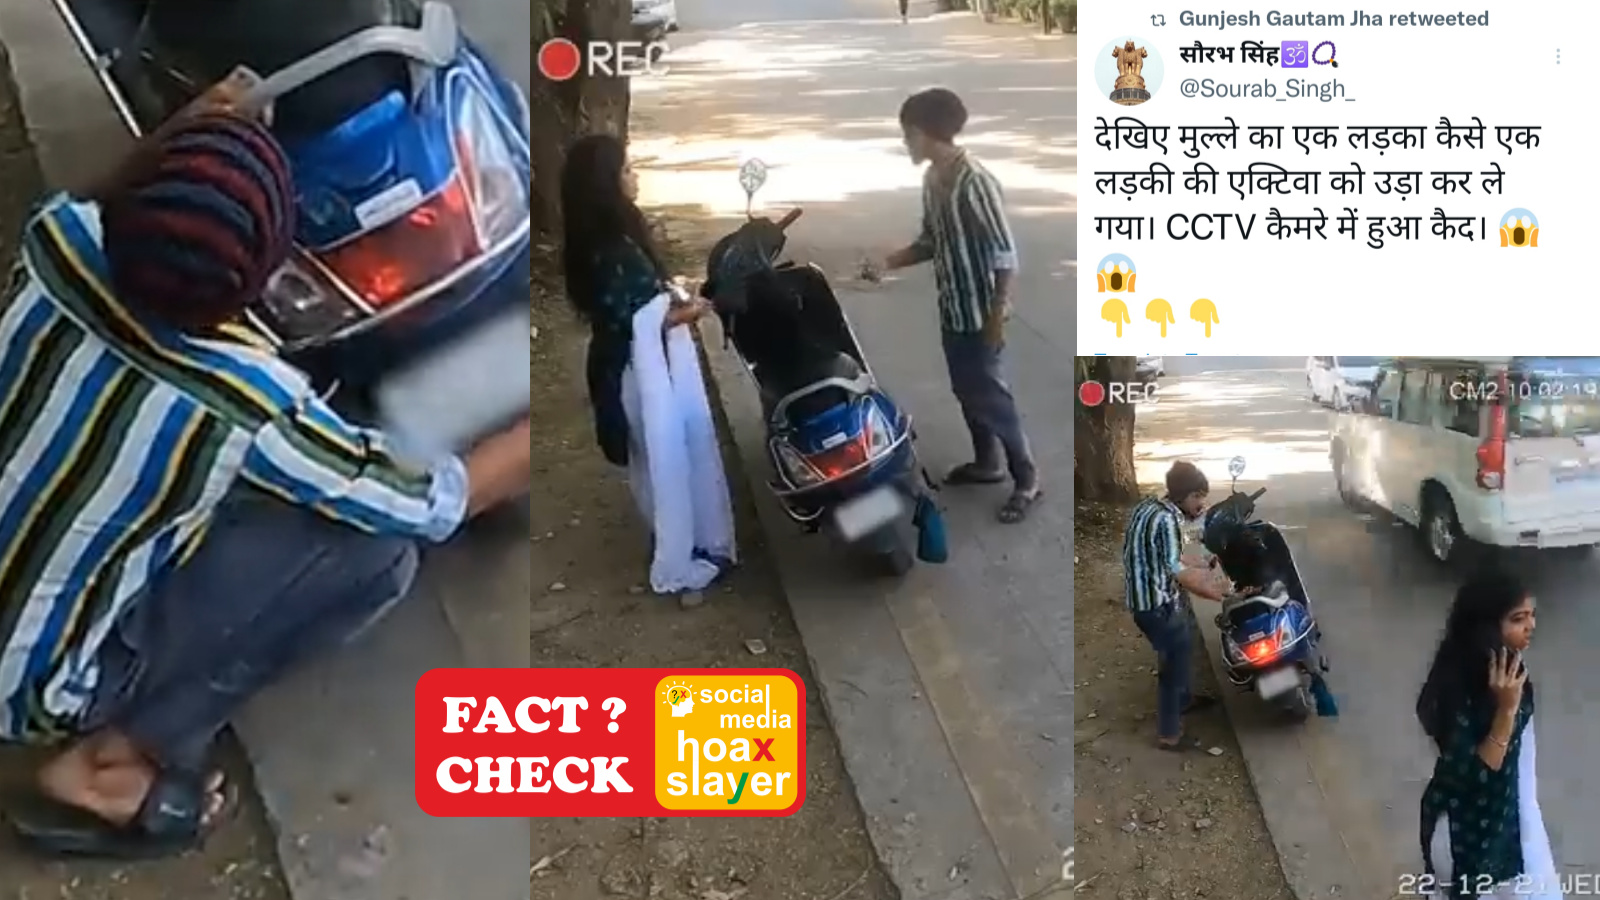 Scripted video of a man stealing a girl's scooter is viral with added communal angle.